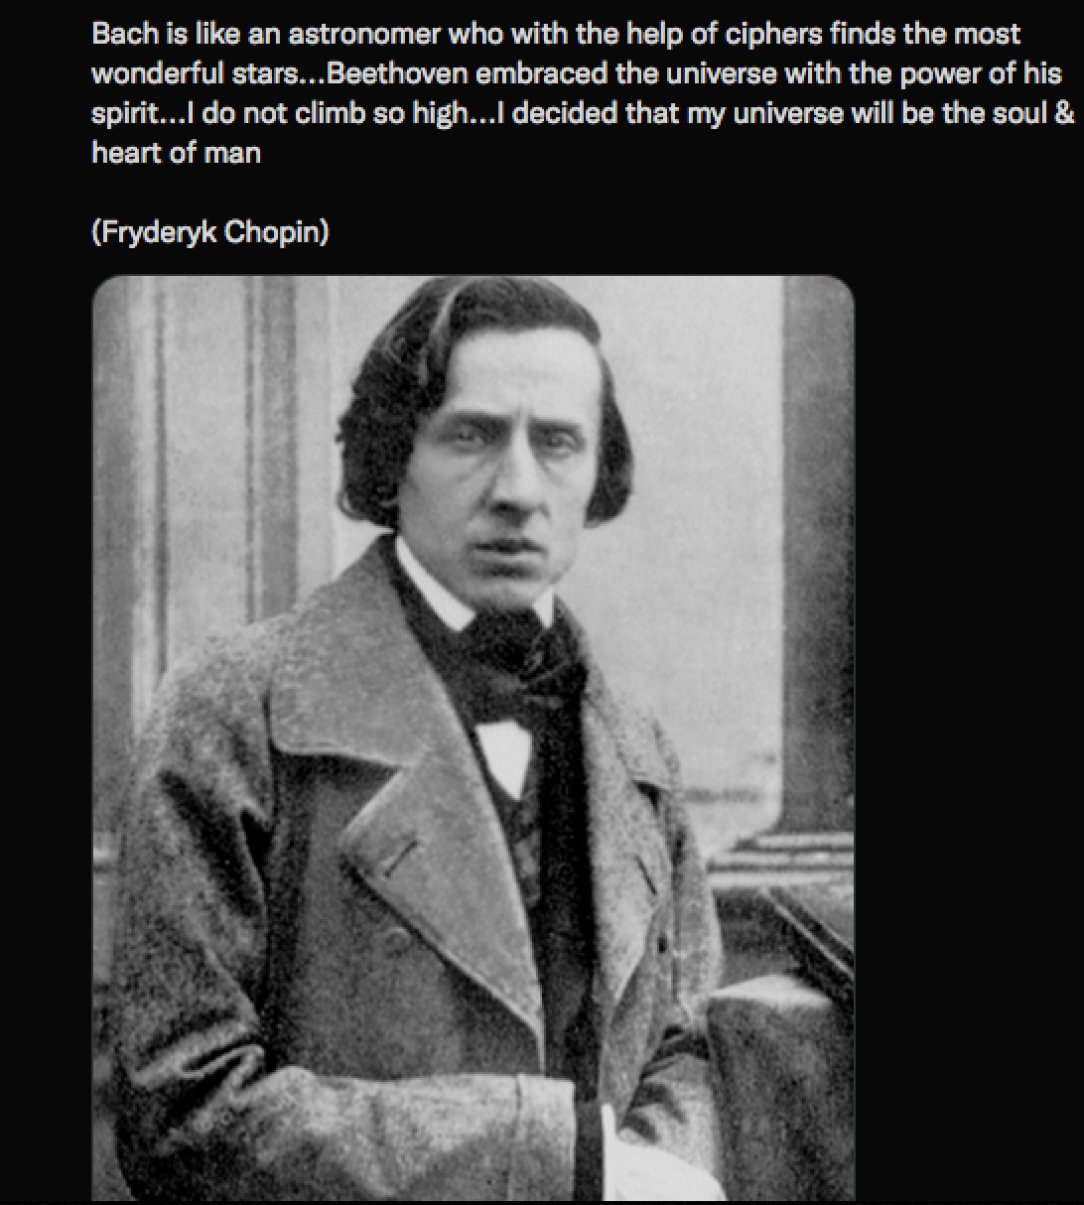 A lovely quote about Bach from Chopin